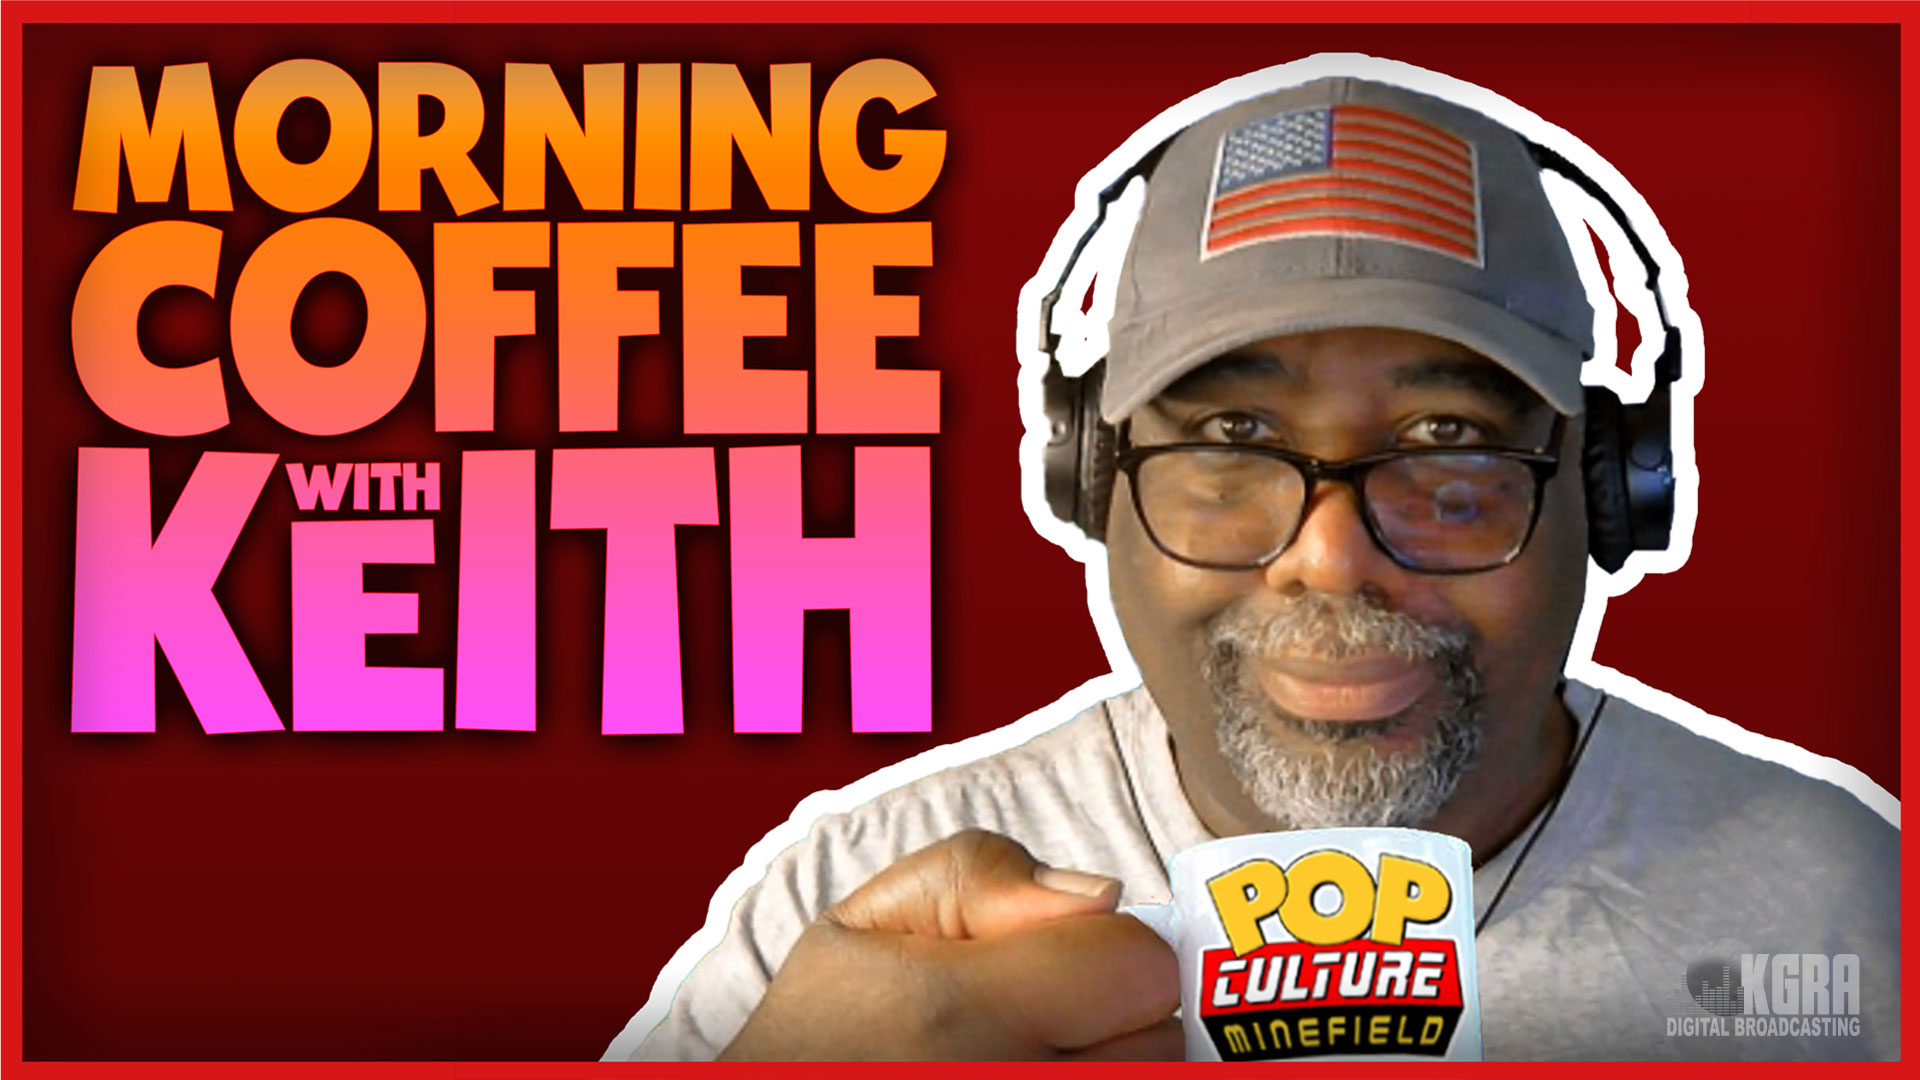 Morning Coffee with Keith - KGRA Digital Broadcasting